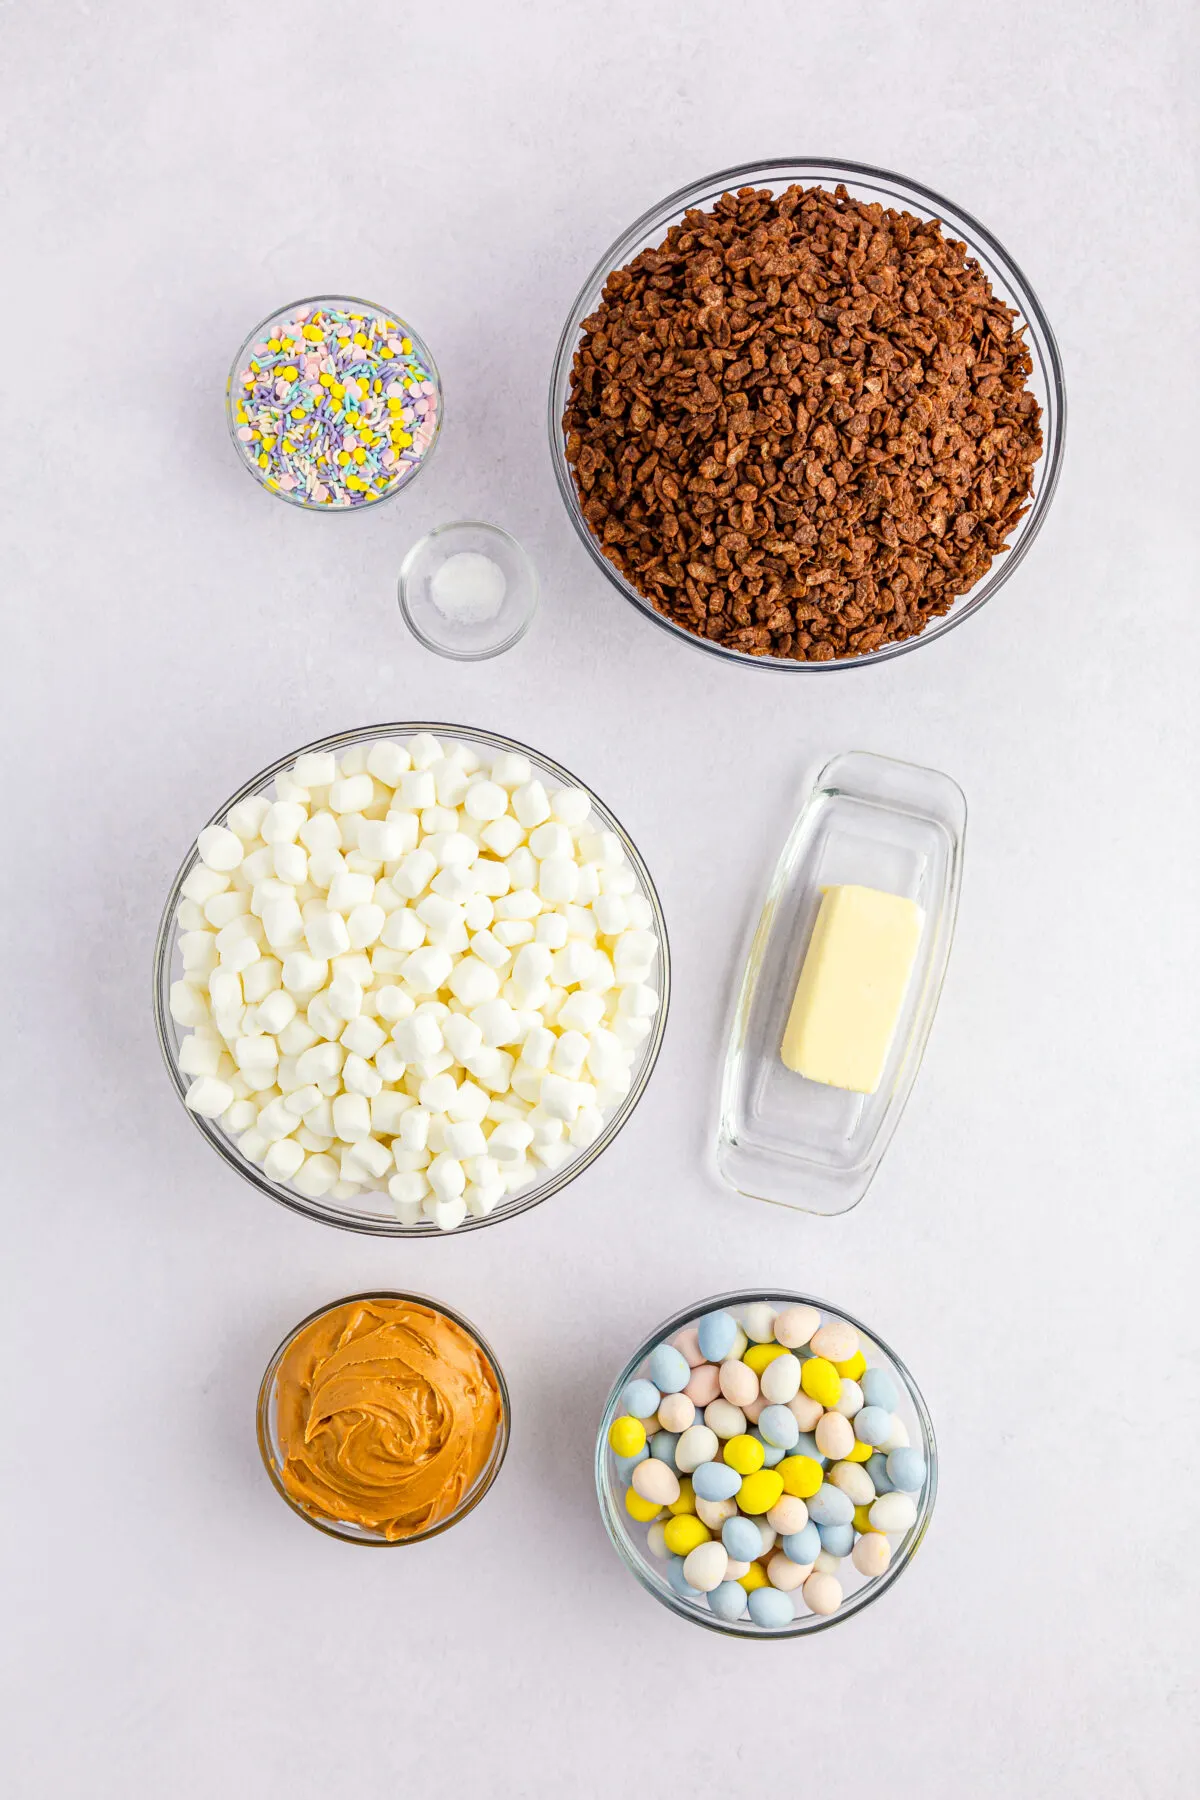 Ingredients for cocoa pebbles Easter nests.